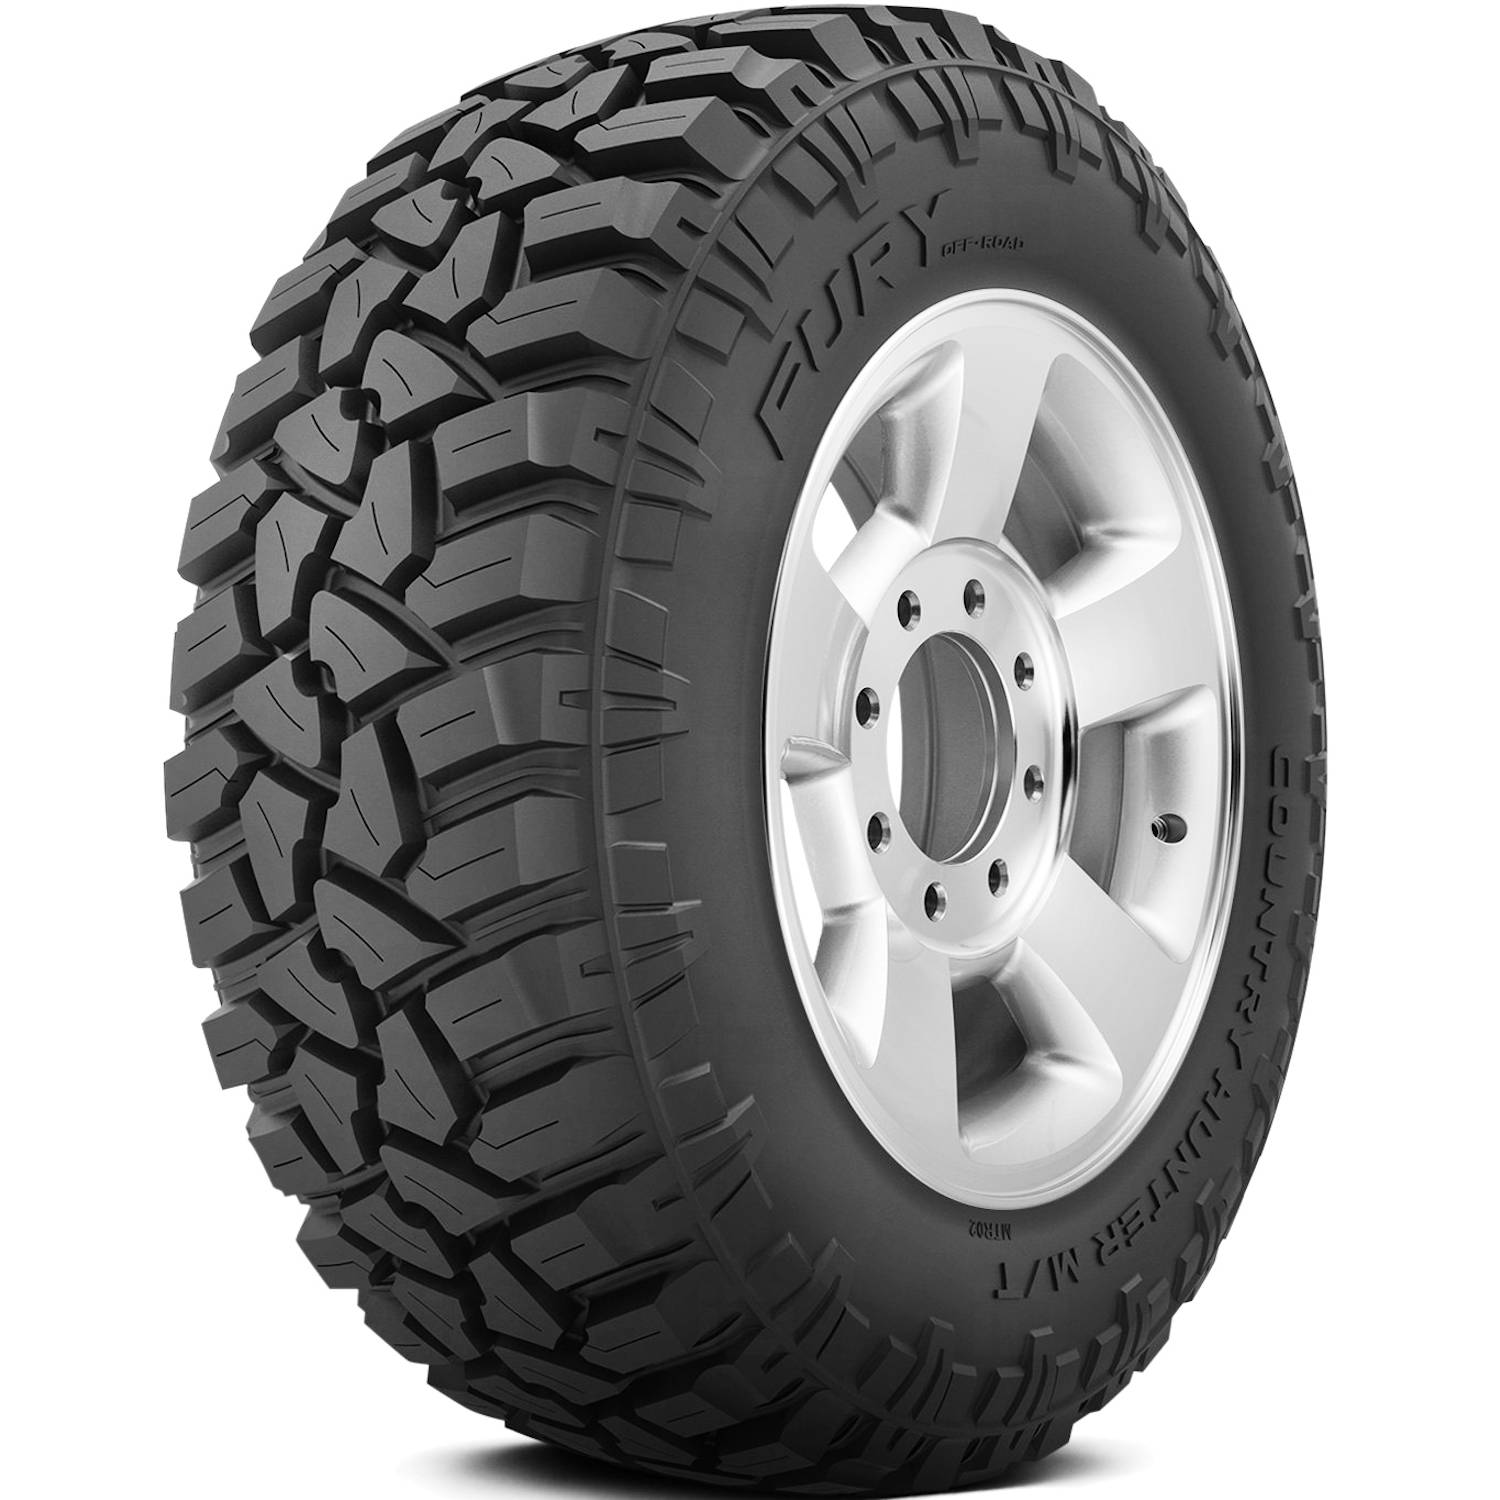 FURY OFFROAD COUNTRY HUNTER MTII 35X12.50R20LT Tires